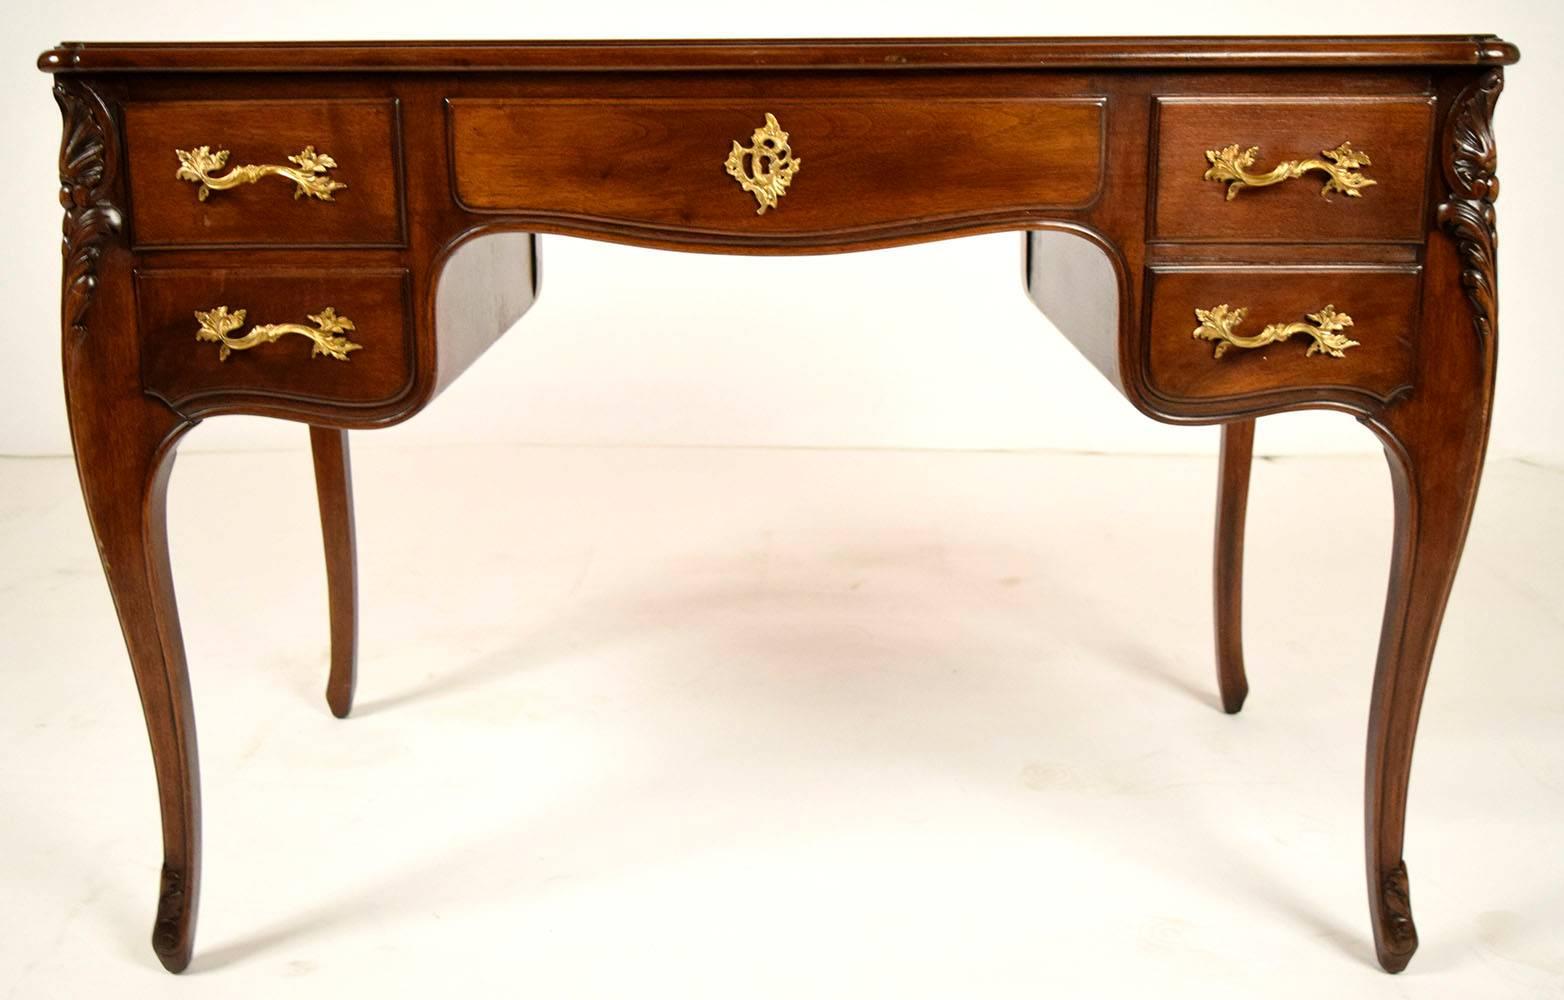 Beautiful 1900s Louis XV Desk. Made from solid walnut wood, with original walnut color finish. Top has original leather top in a distressed finish. Elegant corner carvings of shells and leafs the run down to the end of the serpentine leg. Has five